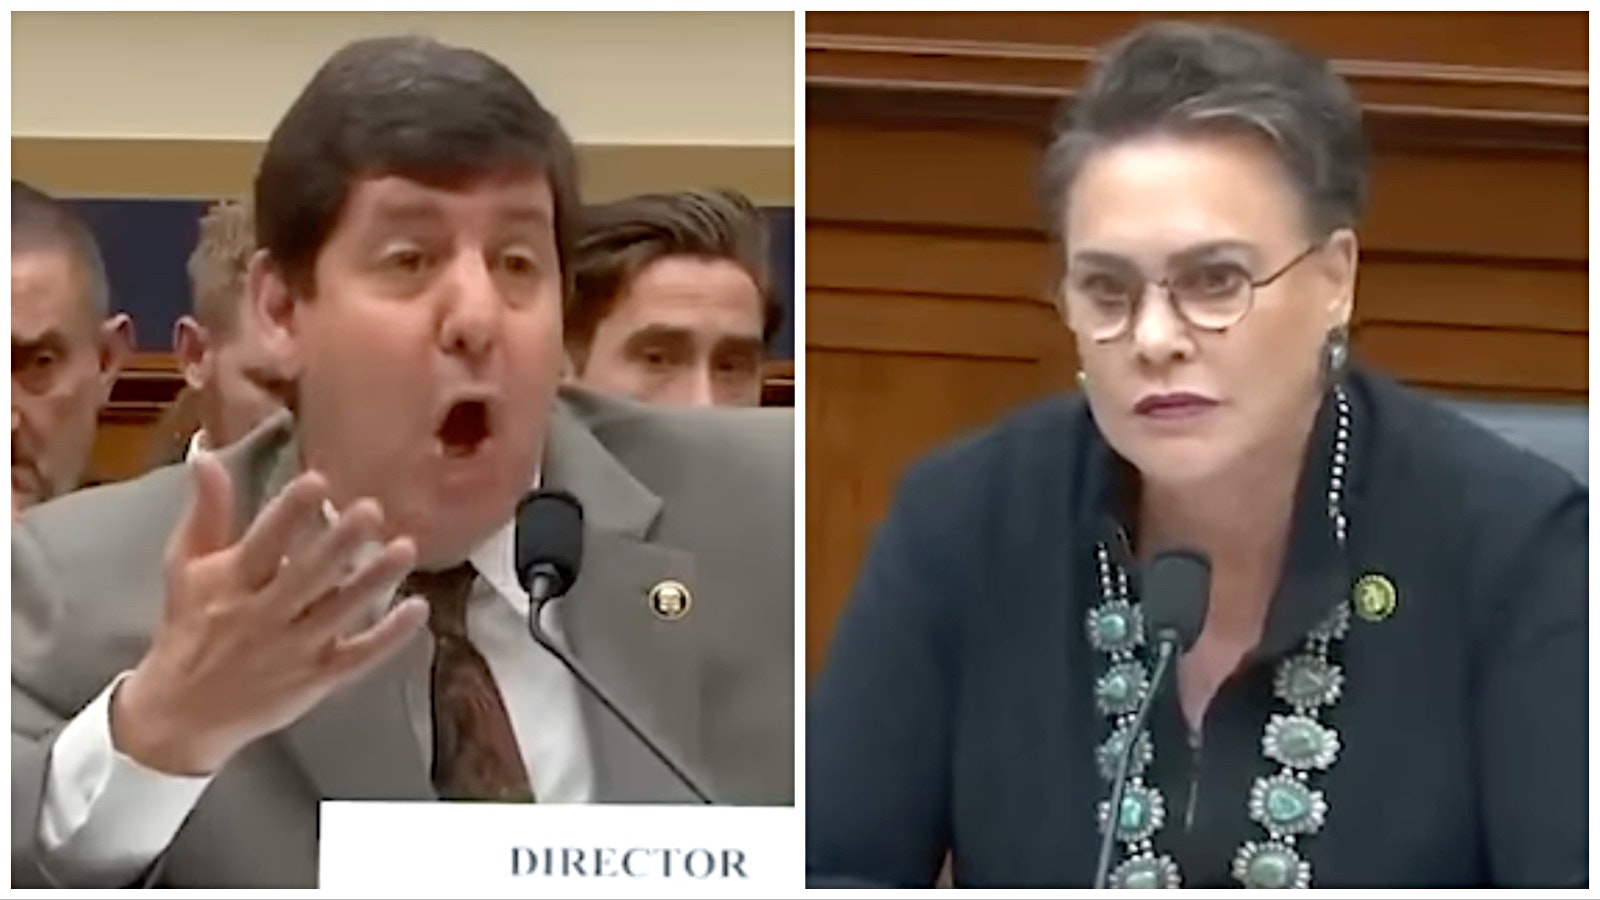 Steven Dettelbach, director of the federal Bureau of Alcohol, Tobacco, Firearms and Explosives, left, is questioned by U.S. Rep. Harriet Hageman, R-Wyoming, during an April 26 House Judiciary Committee hearing. Hageman asked the director about the agency's attempts "to subvert the authority of Congress."